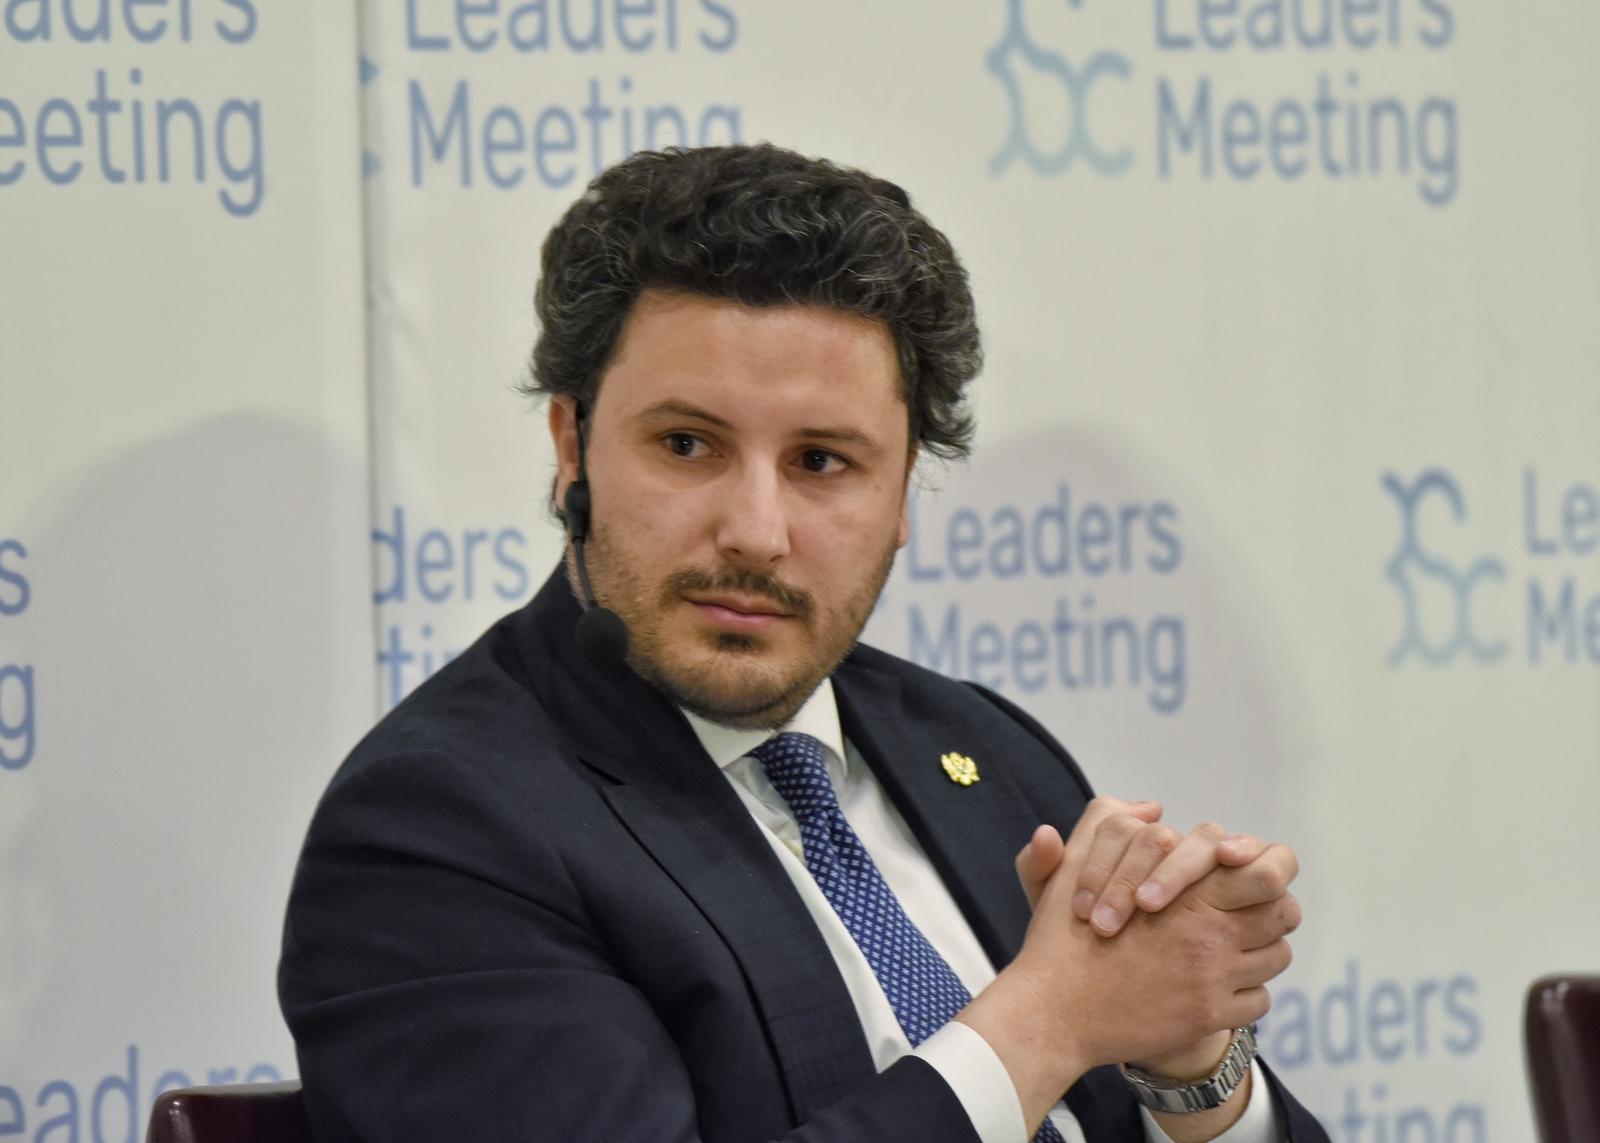 12, April, 2023, Podgorica - The Belgrade Center for Security Policy and the Institute of Alternatives (IA) organized the first BSC Leaders Meeting event in Podgorica. Dritan Abazovic. Photo: R.R./ATAImages

12, april, 2023, Podgorica  - Beogradski centar za bezbednosnu politiku i Institut alternativa (IA) su organizovali prvi BSC Leaders Meeting dogadjaj u Podgorici. Photo: R.R./ATAImages Photo: R.R./ATAImages/PIXSELL